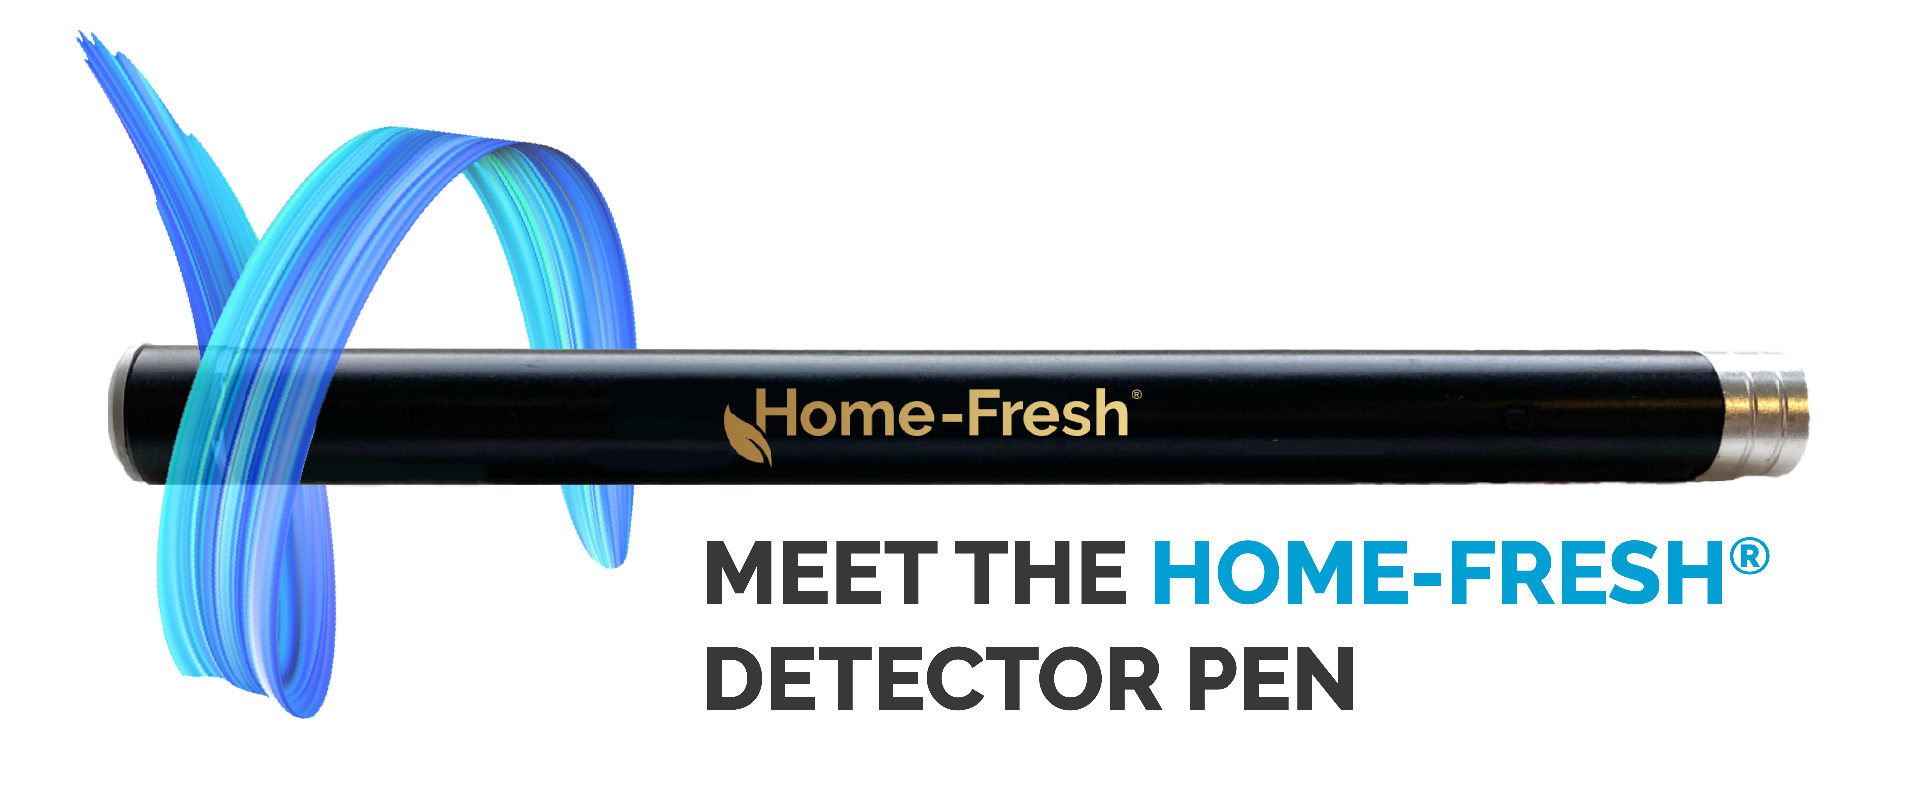 Home Fresh Detector Pen, Verify there is mould treatment on your wall